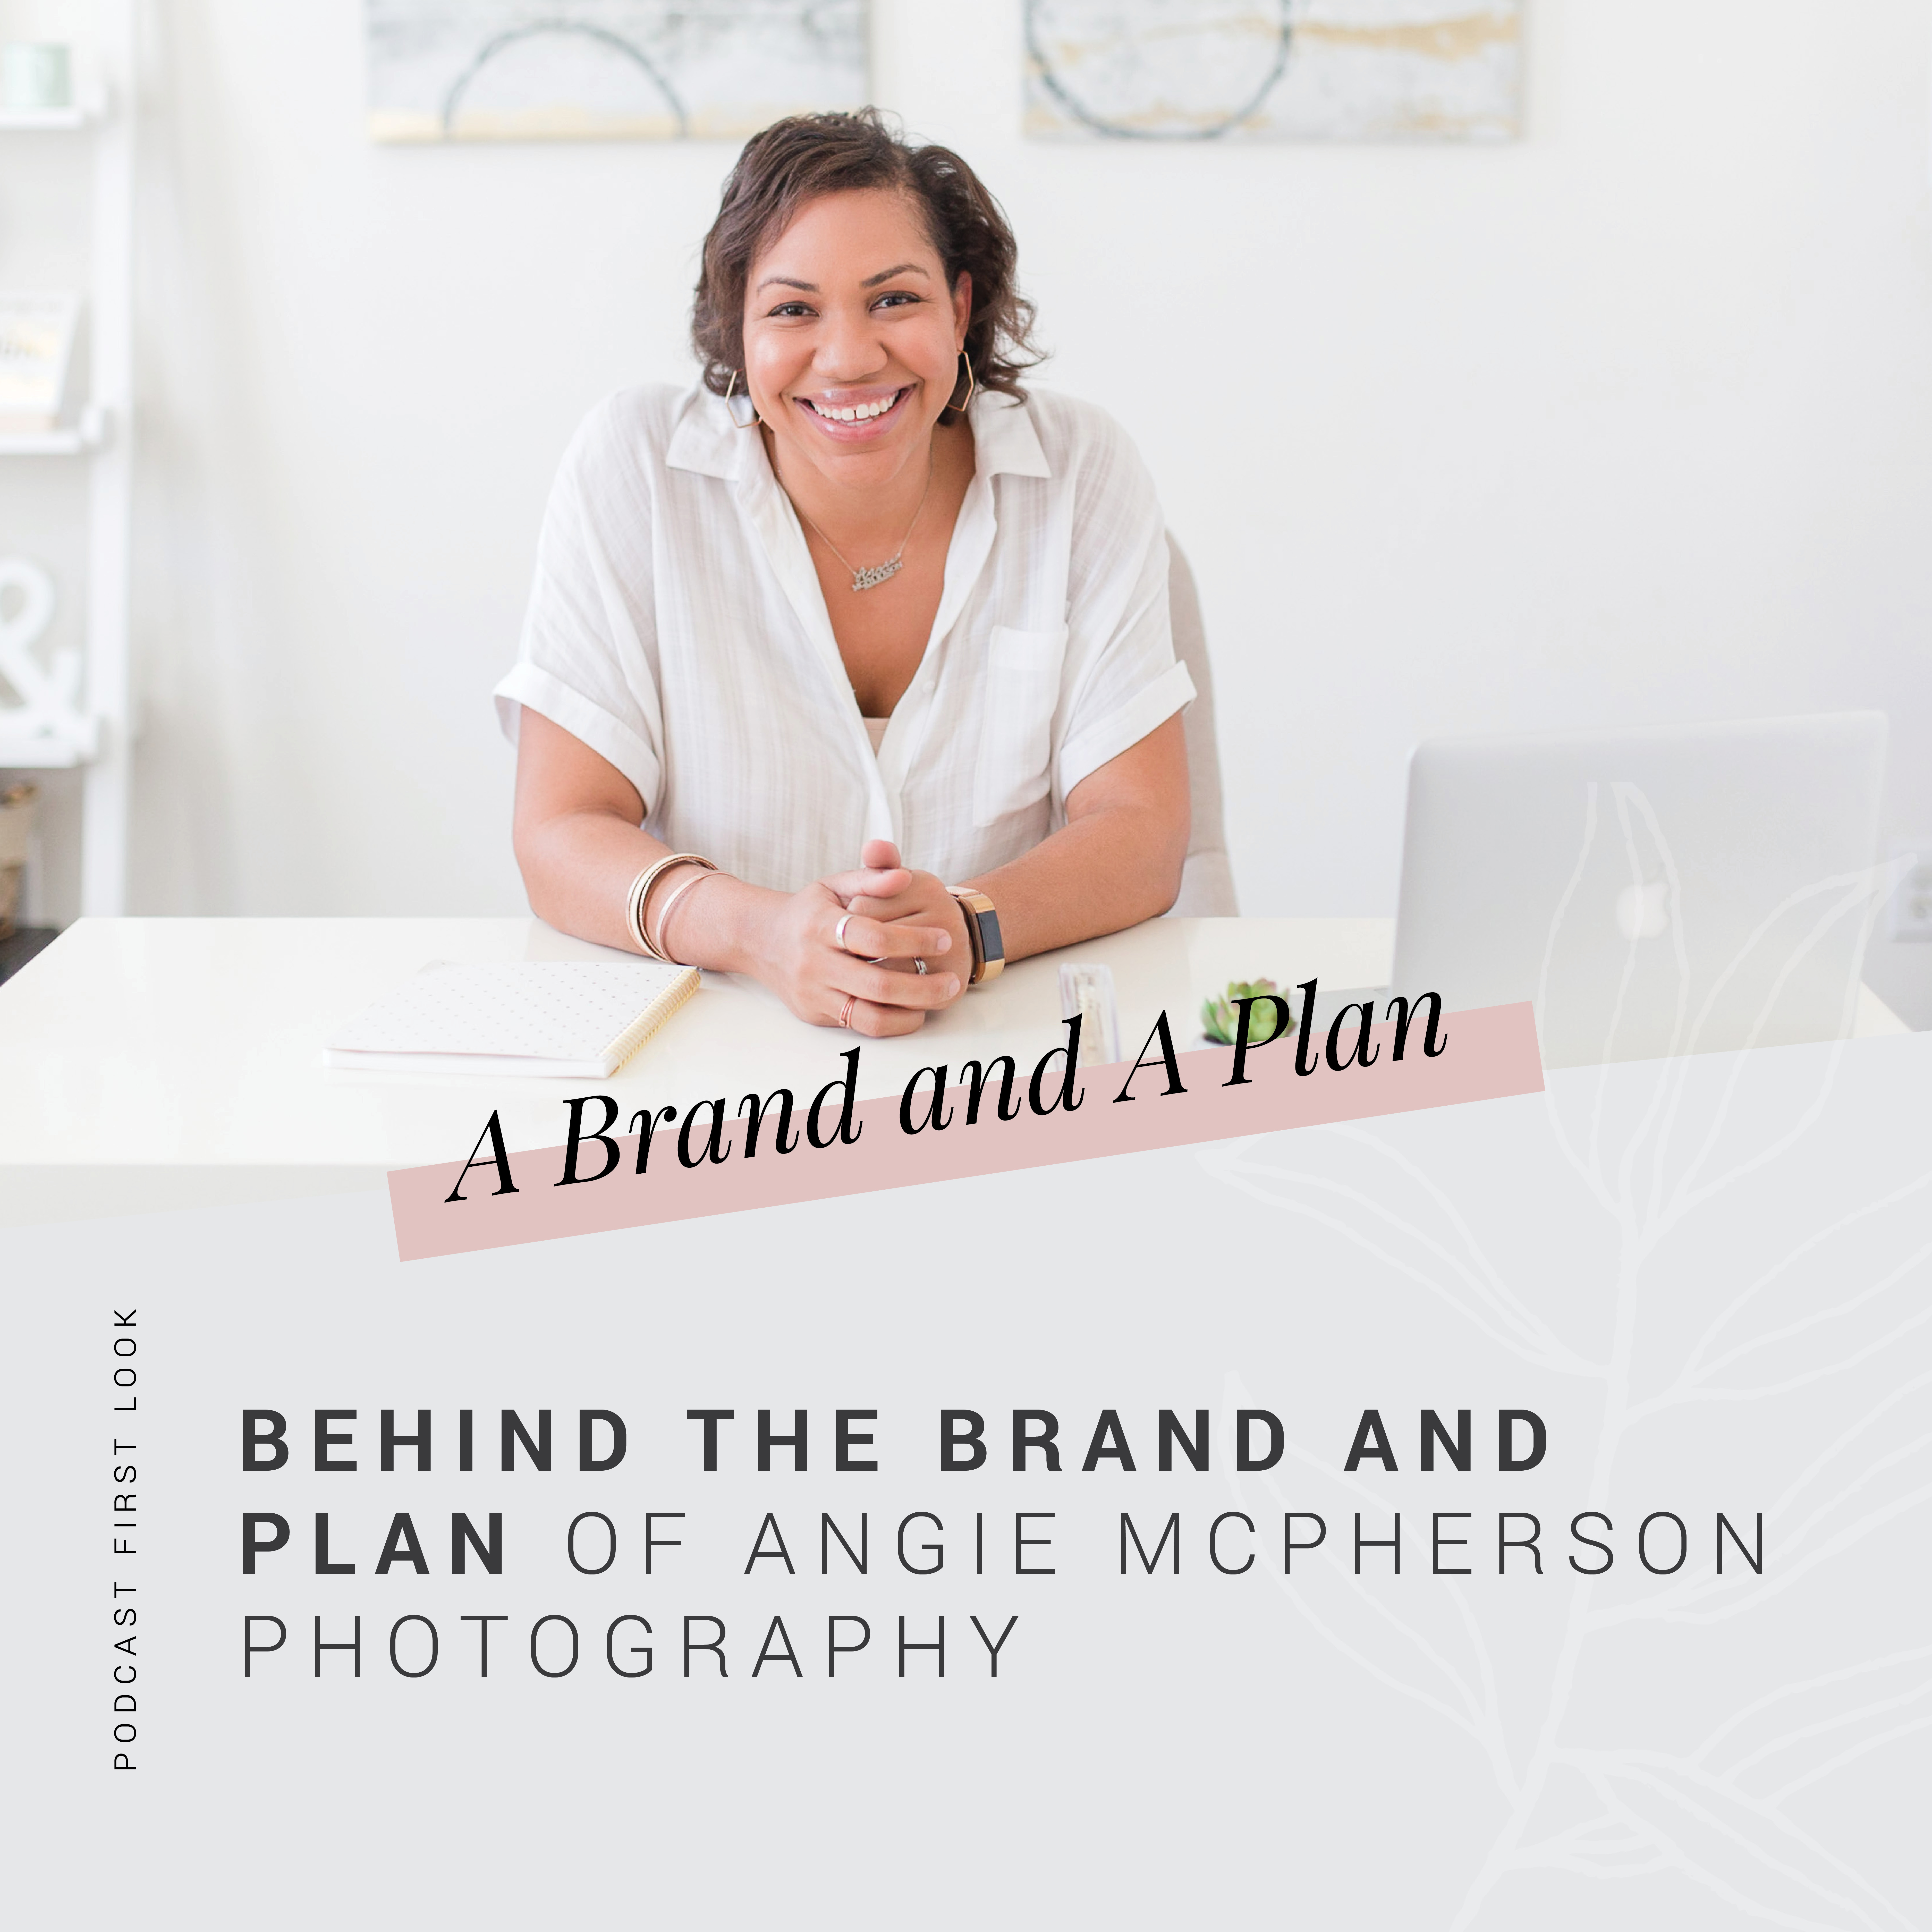 Behind the Brand of Angie McPherson Photography